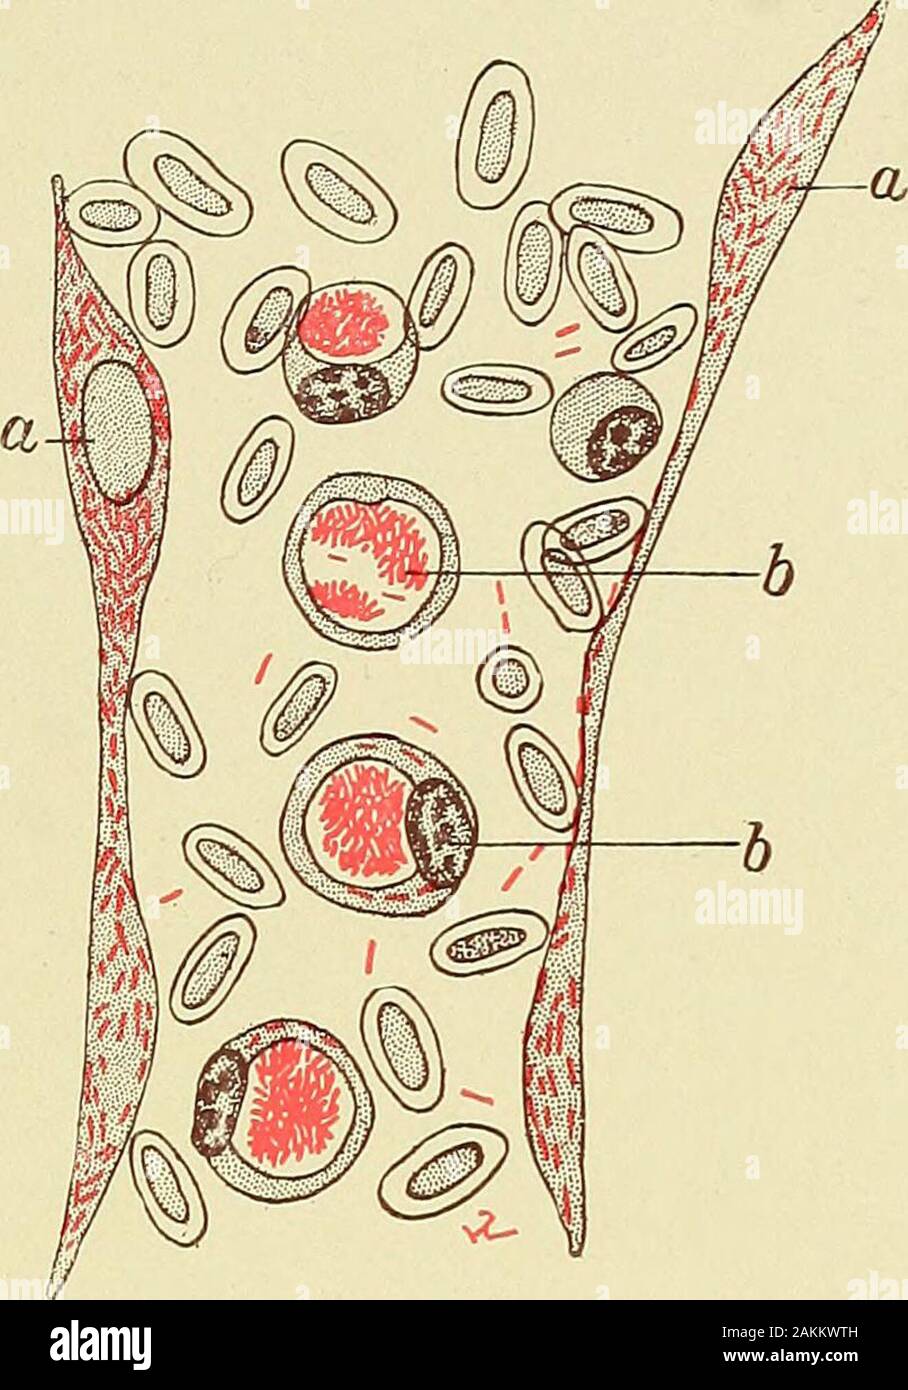 A manual of modern surgery : an exposition of the accepted doctrines and approved operative procedures of the present time, for the use of students and practitioners . by division or by the formation of spores.Yeasts, or sprouting fungi (blastomycetes), however, multiply bythe budding process ; while the moulds (hyphomycetes) have a morecomplicated method of multiplication or reproduction, and are char-acterized by numerous threads which interlace and form the mycelium. Some of the protozoa, microscopic organisms belonging to the ani-mal kingdom, infect animals and cause disease; but they are Stock Photo